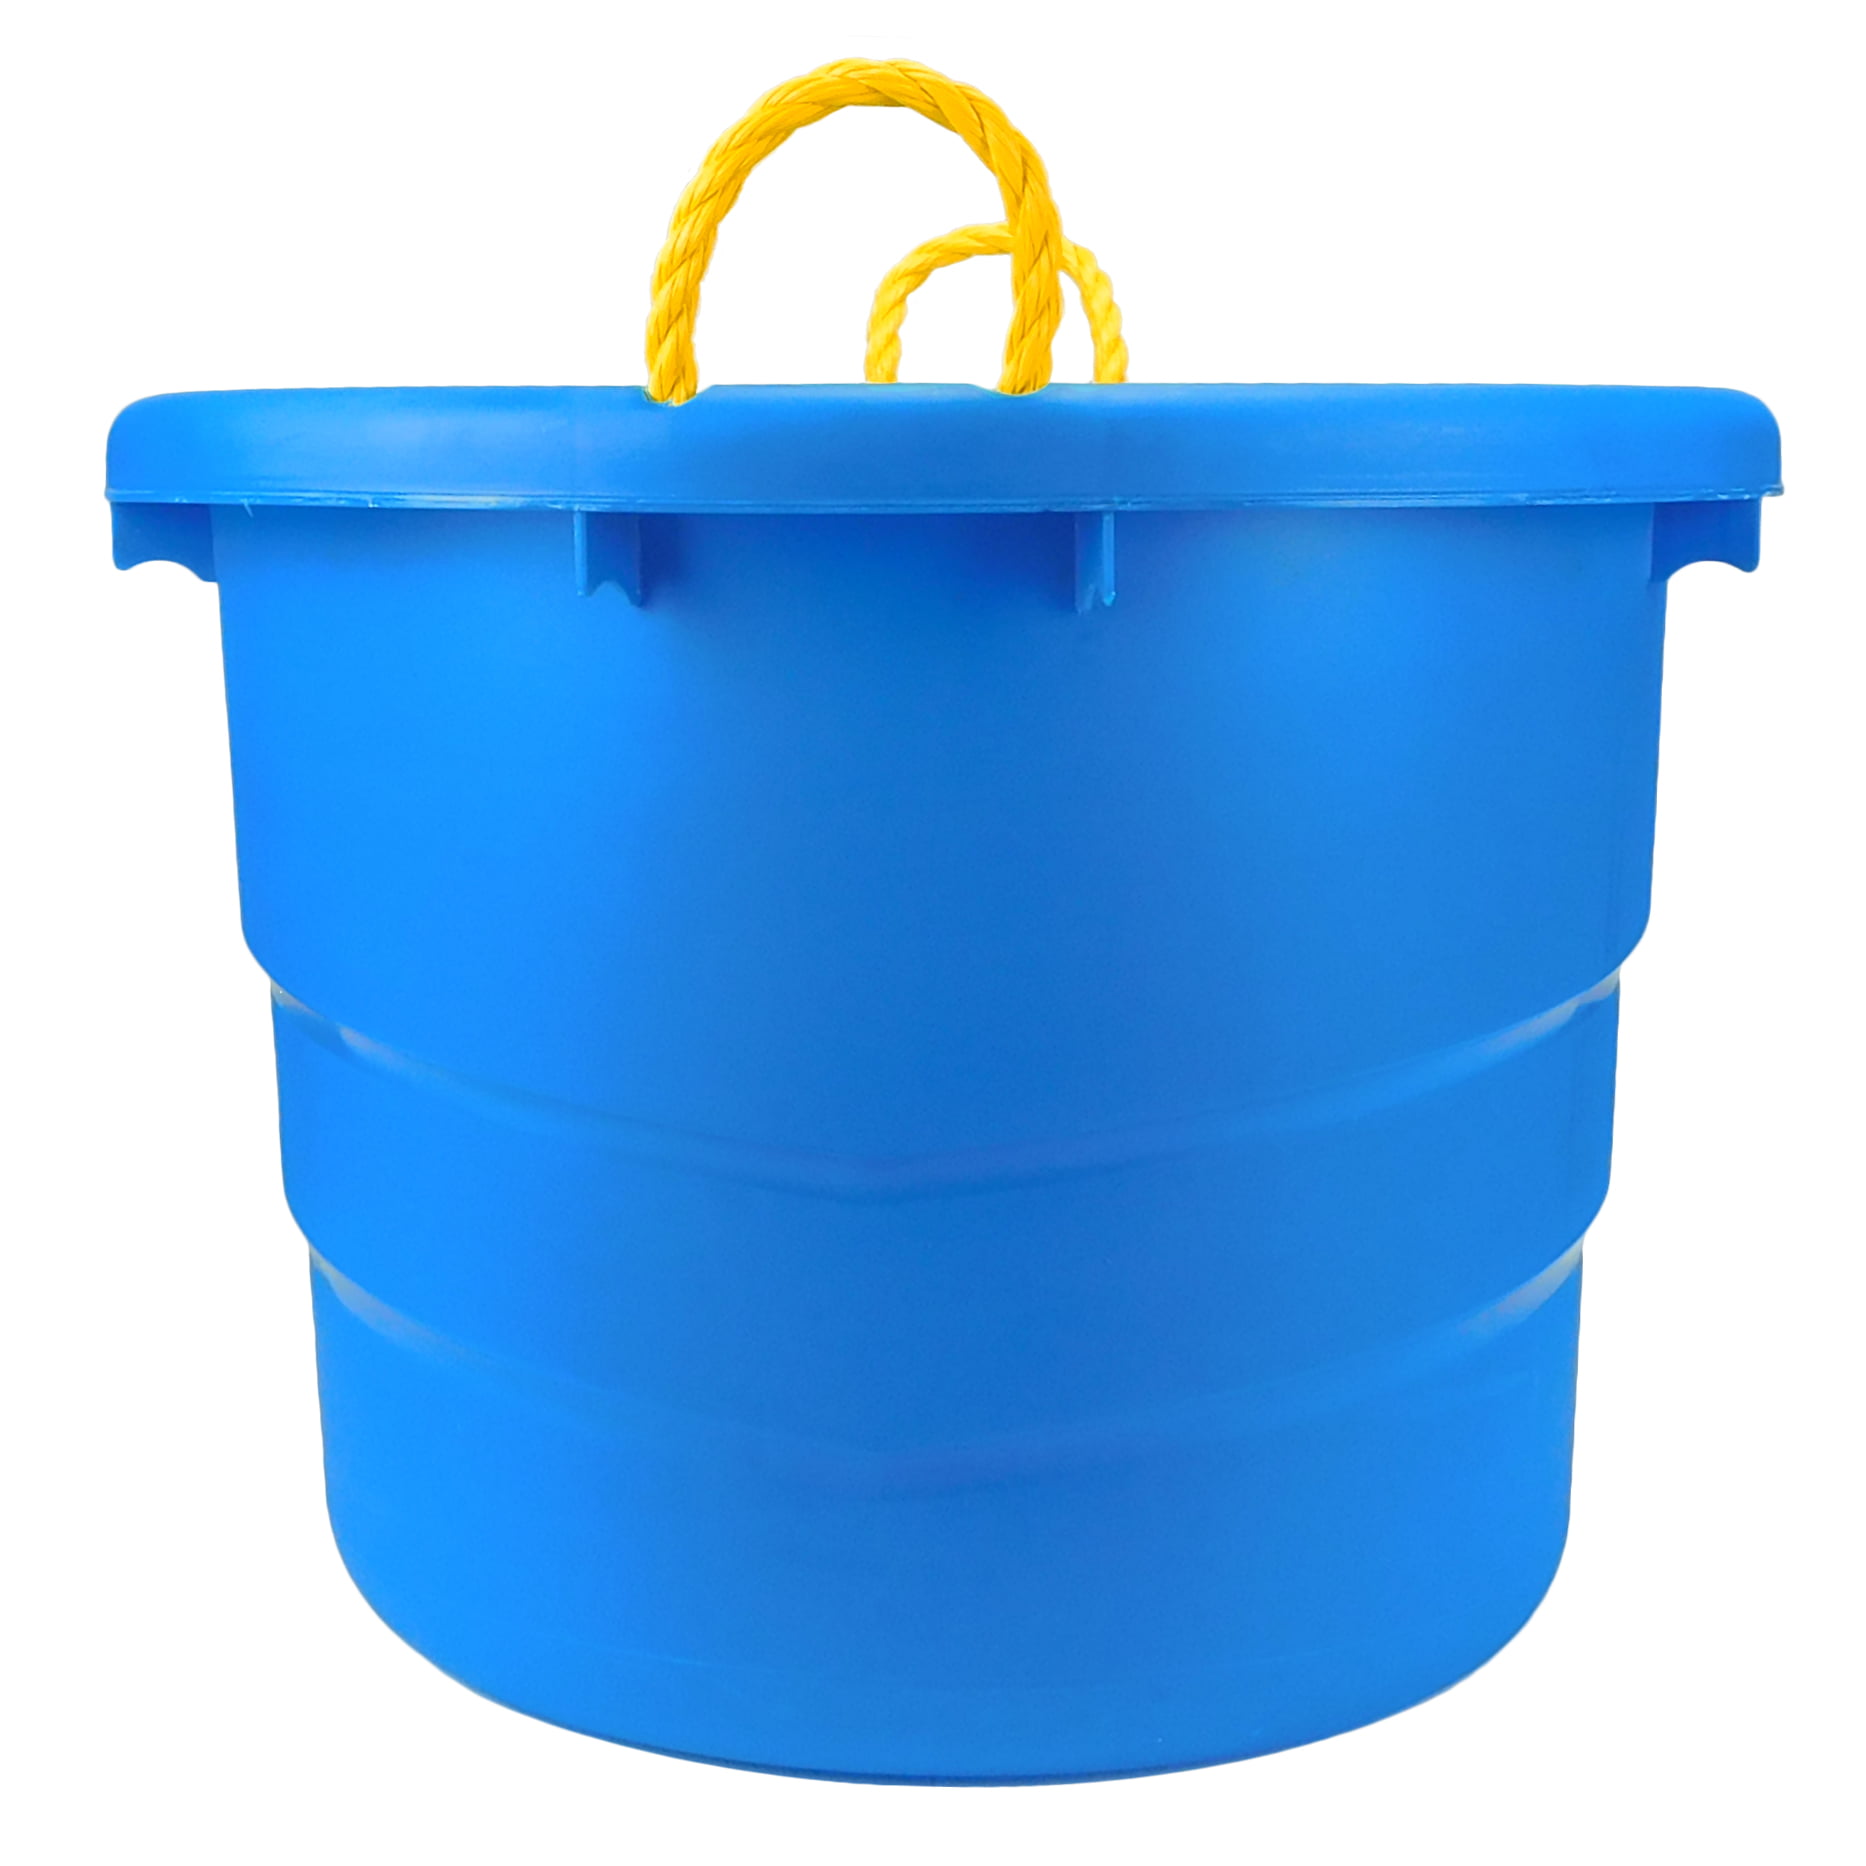 Plastic Utility Tub with Rope Handles, 12 Gallon, Blue